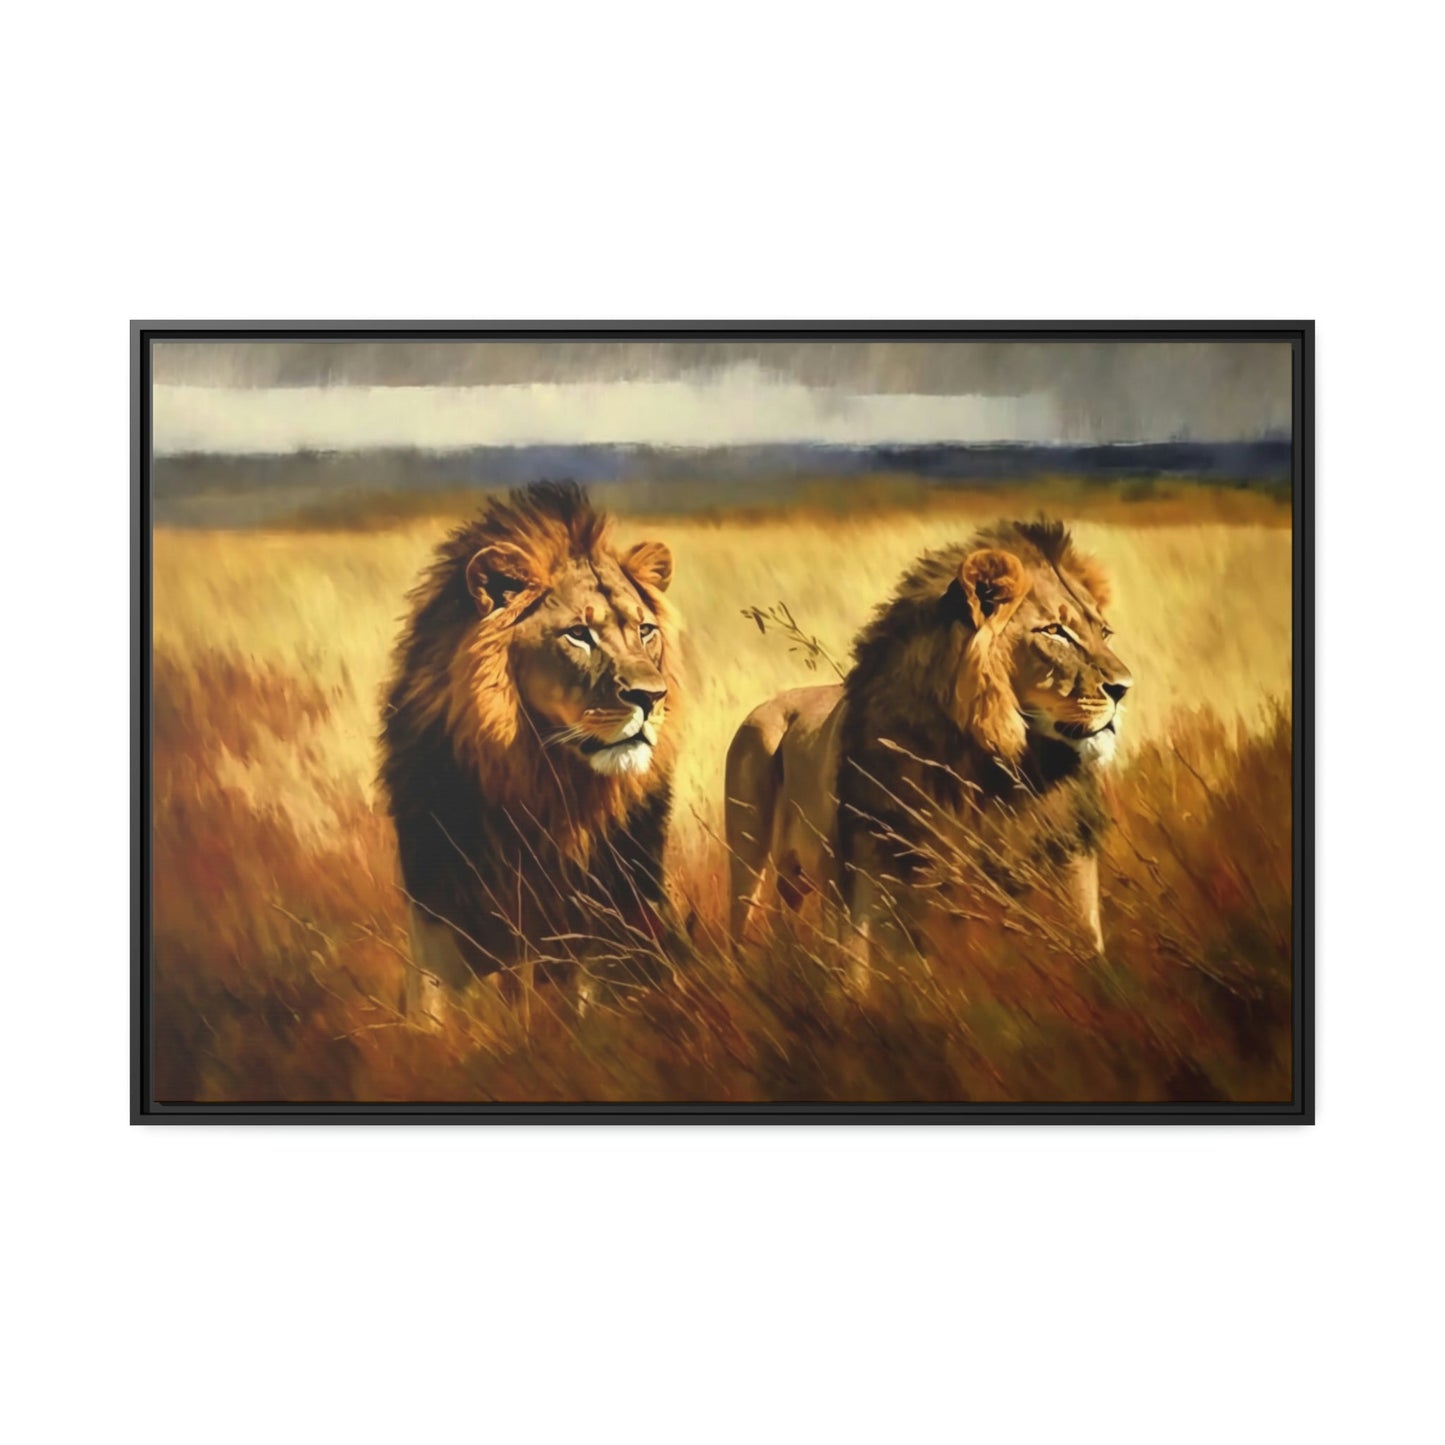 King of Beasts: A Painting of Lions